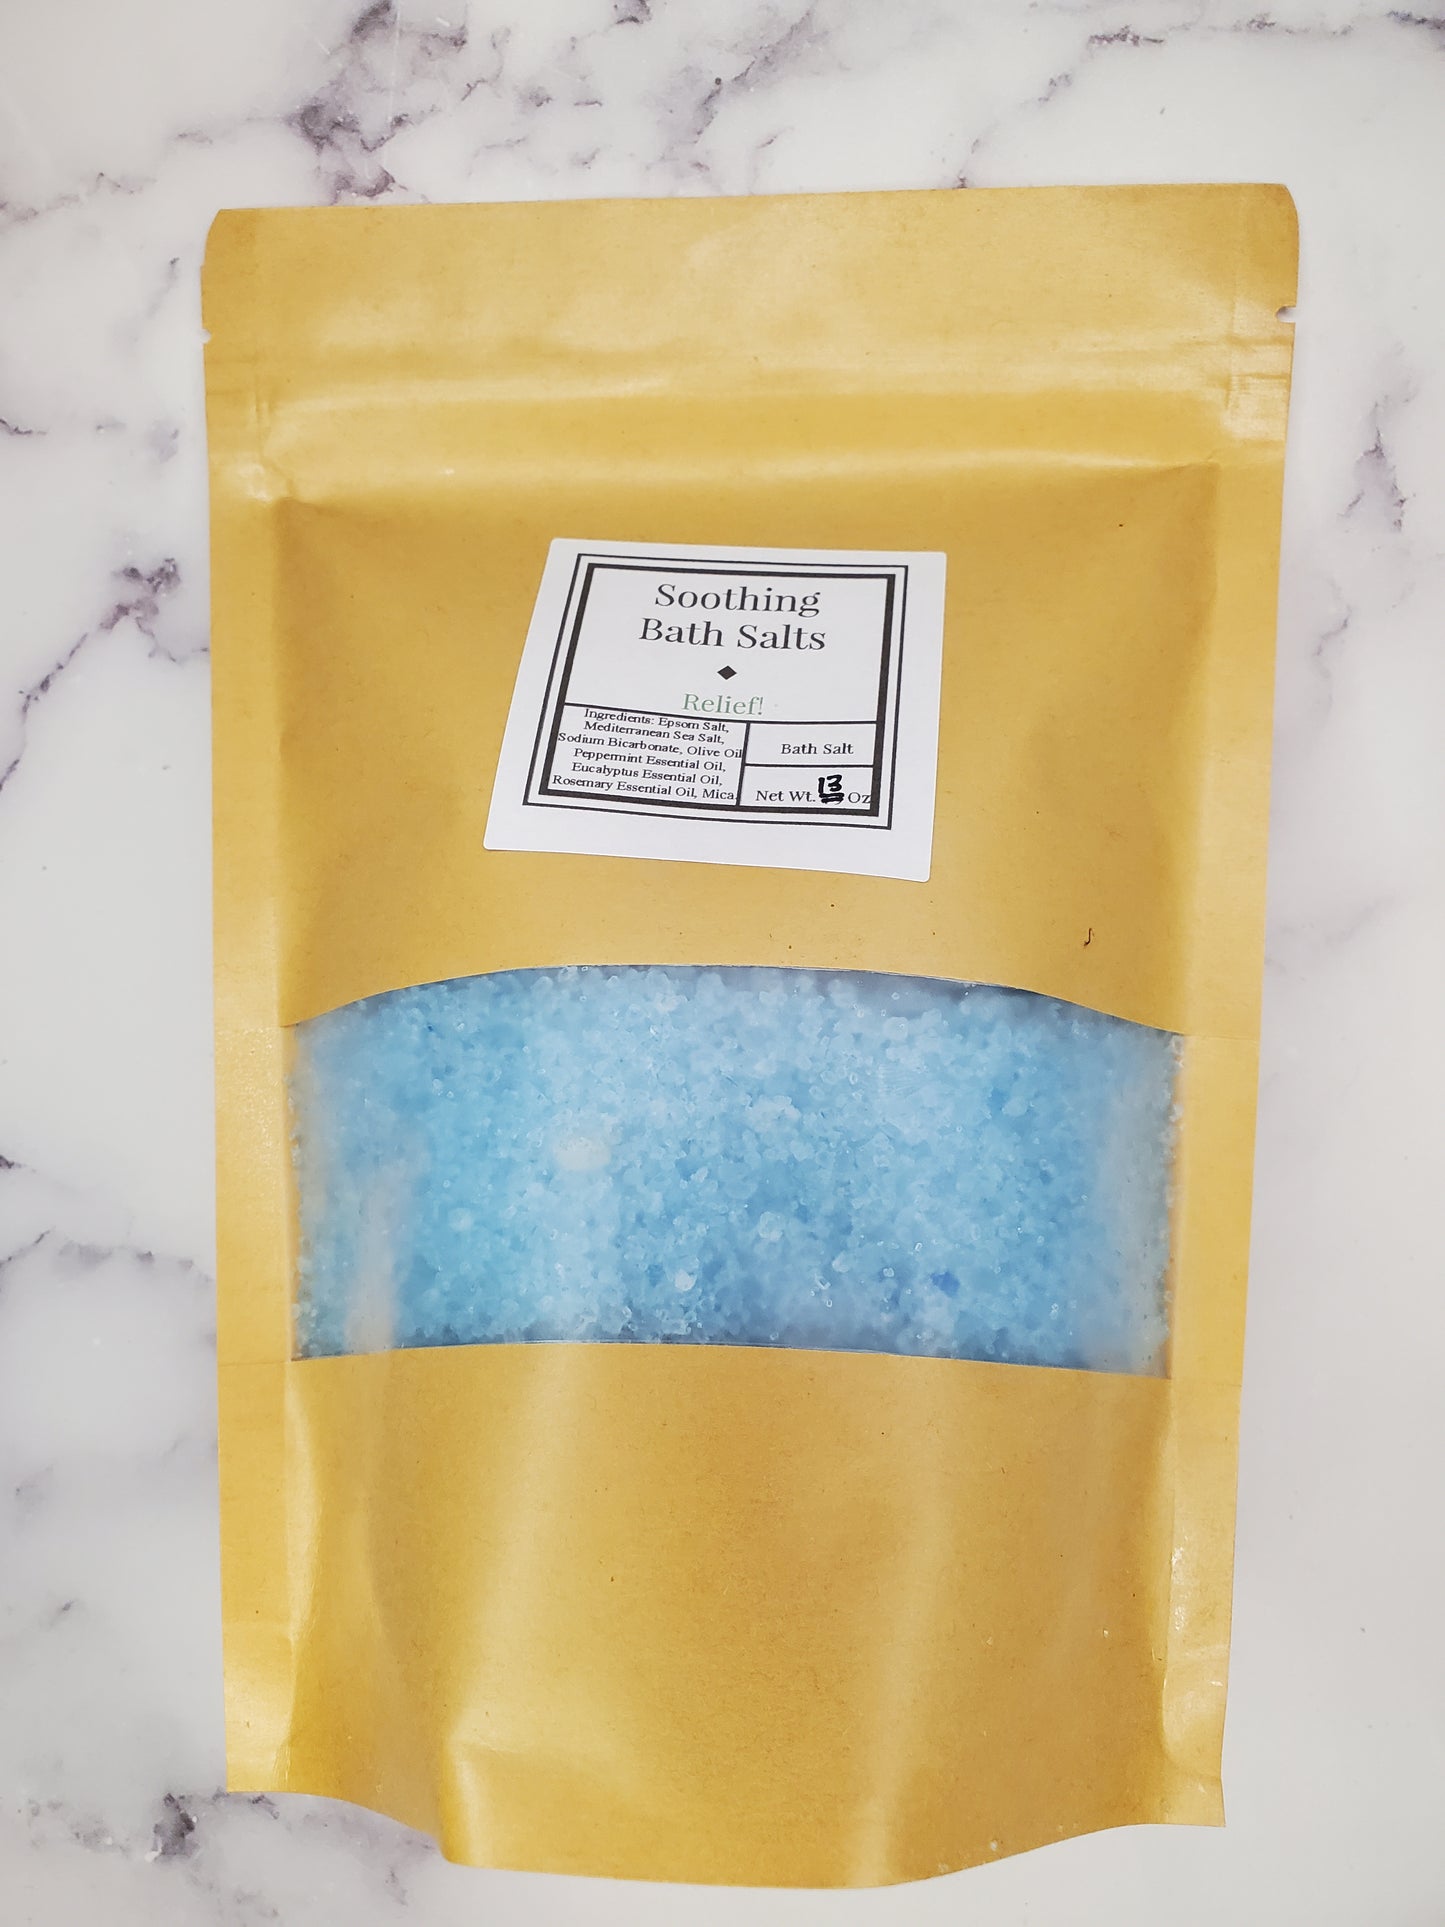 Relief! Soothing Bath Salts